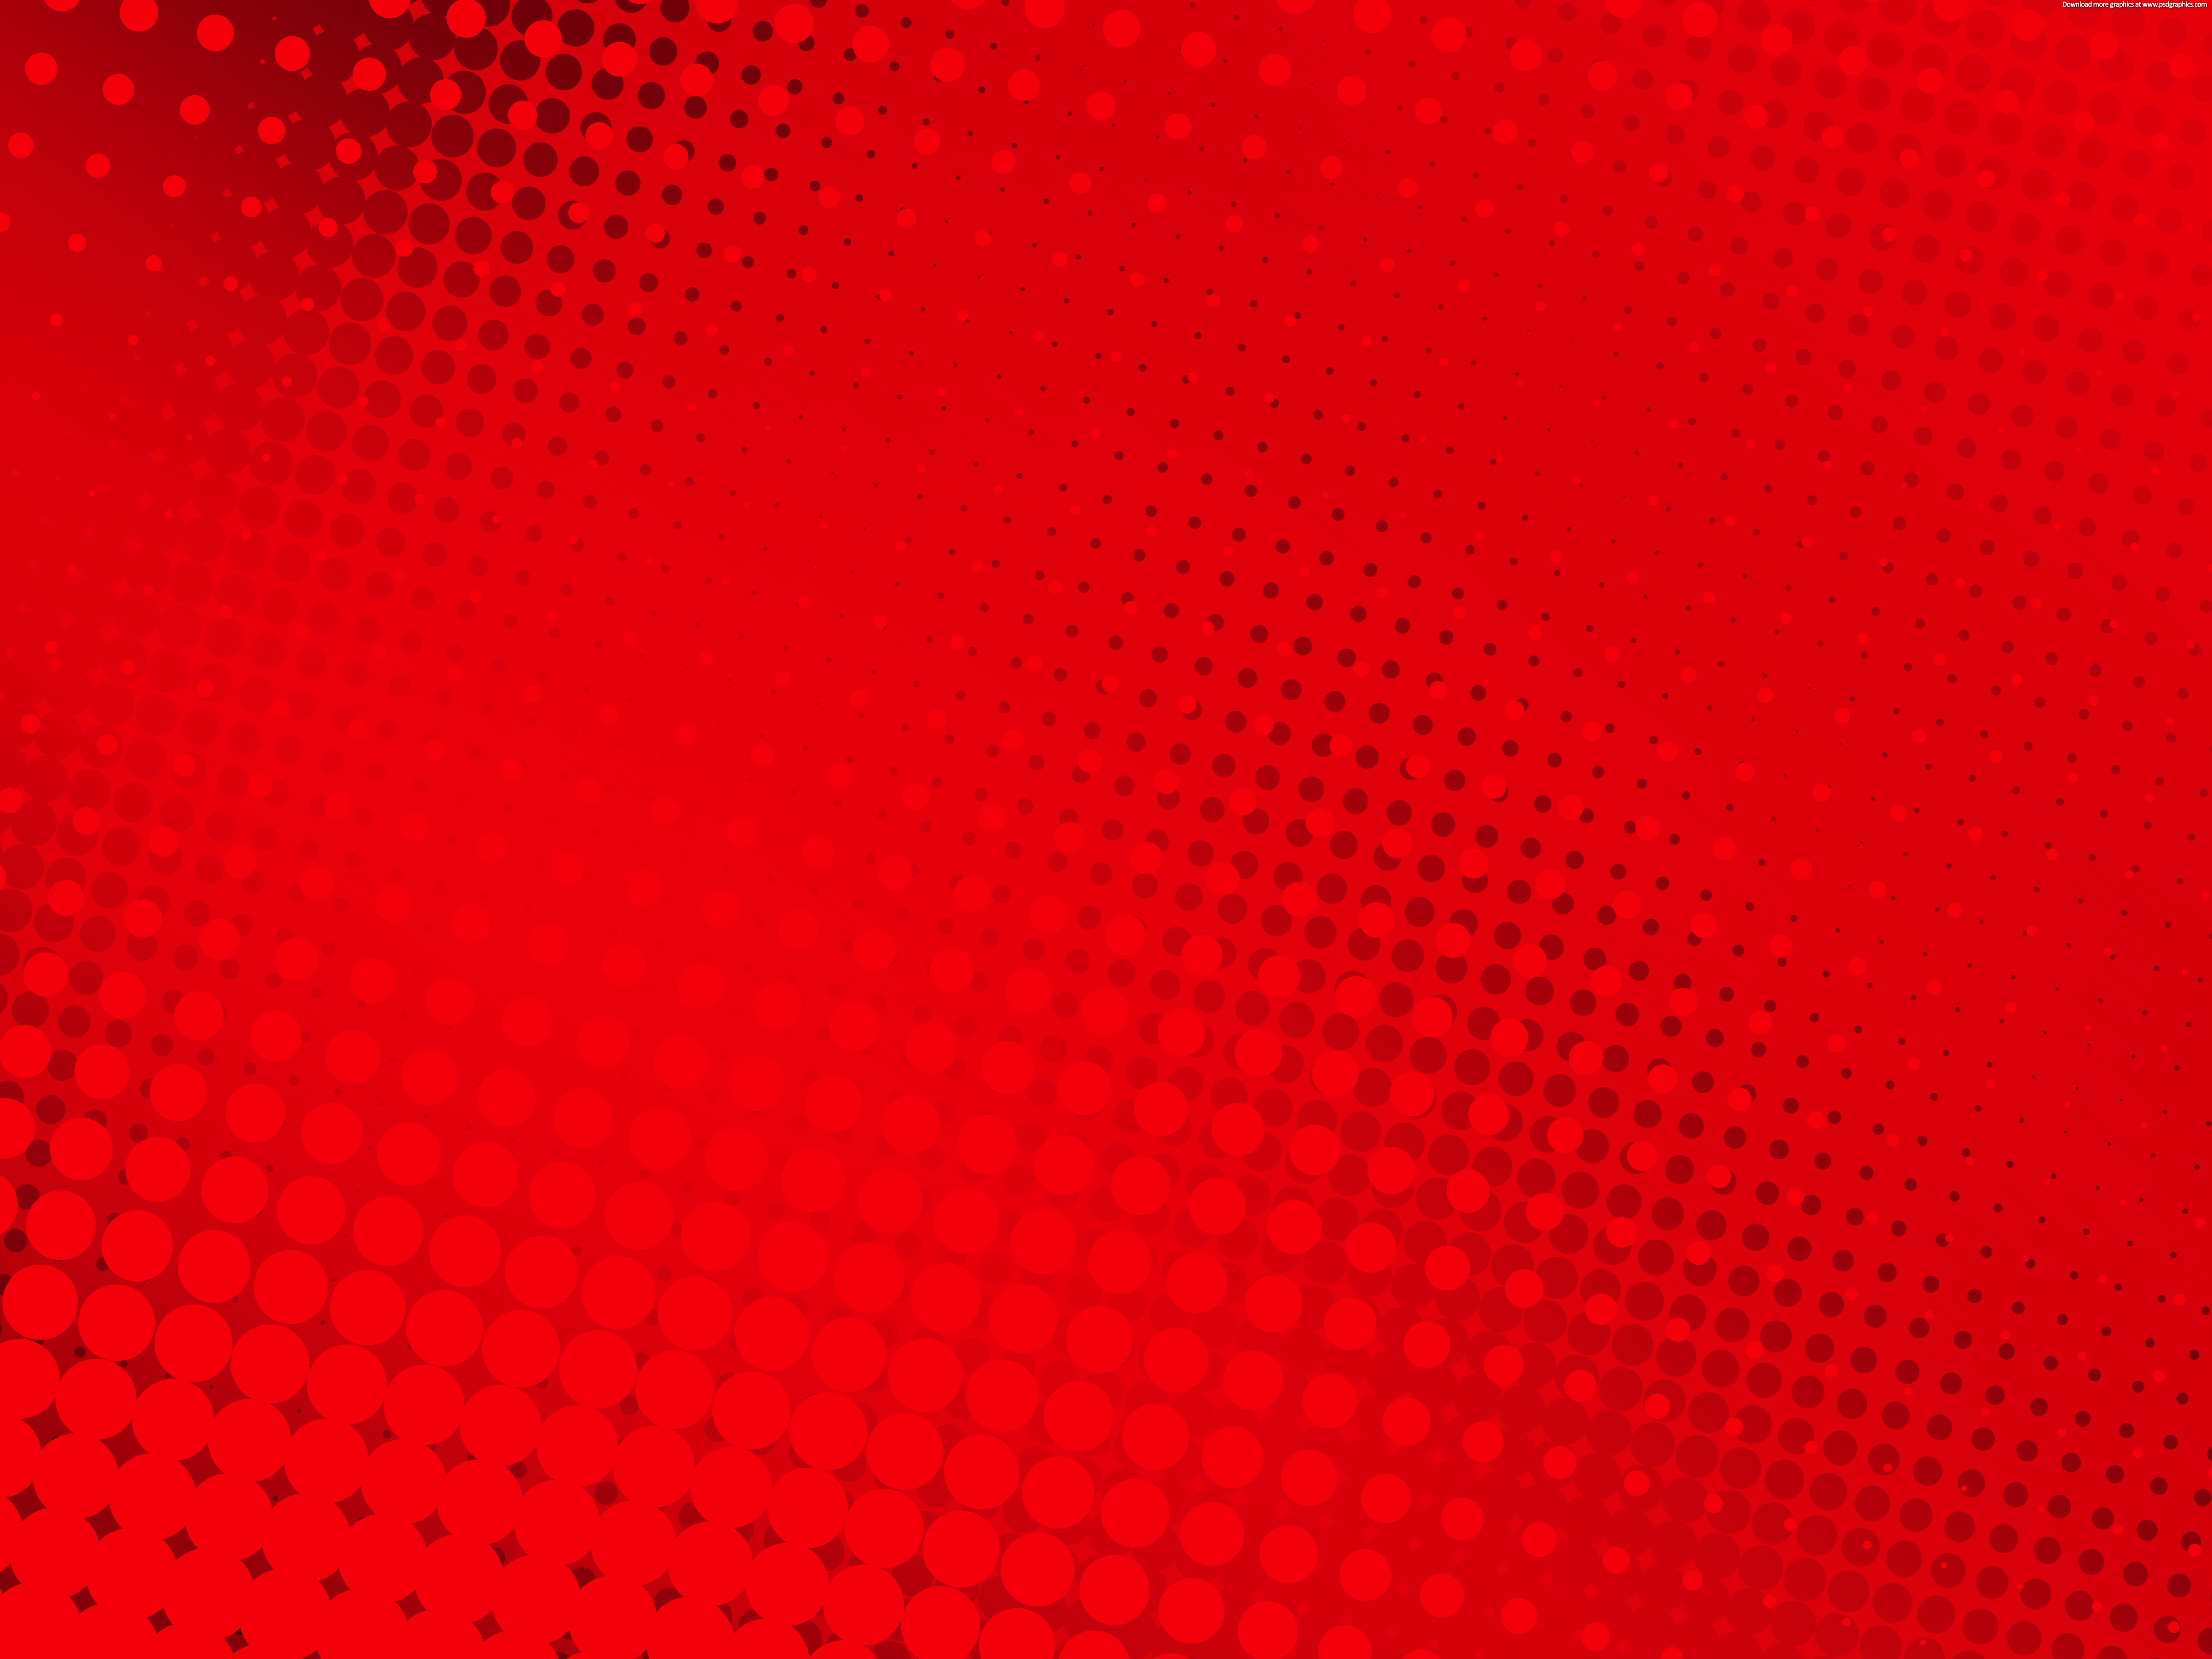 Red For News Channel Design